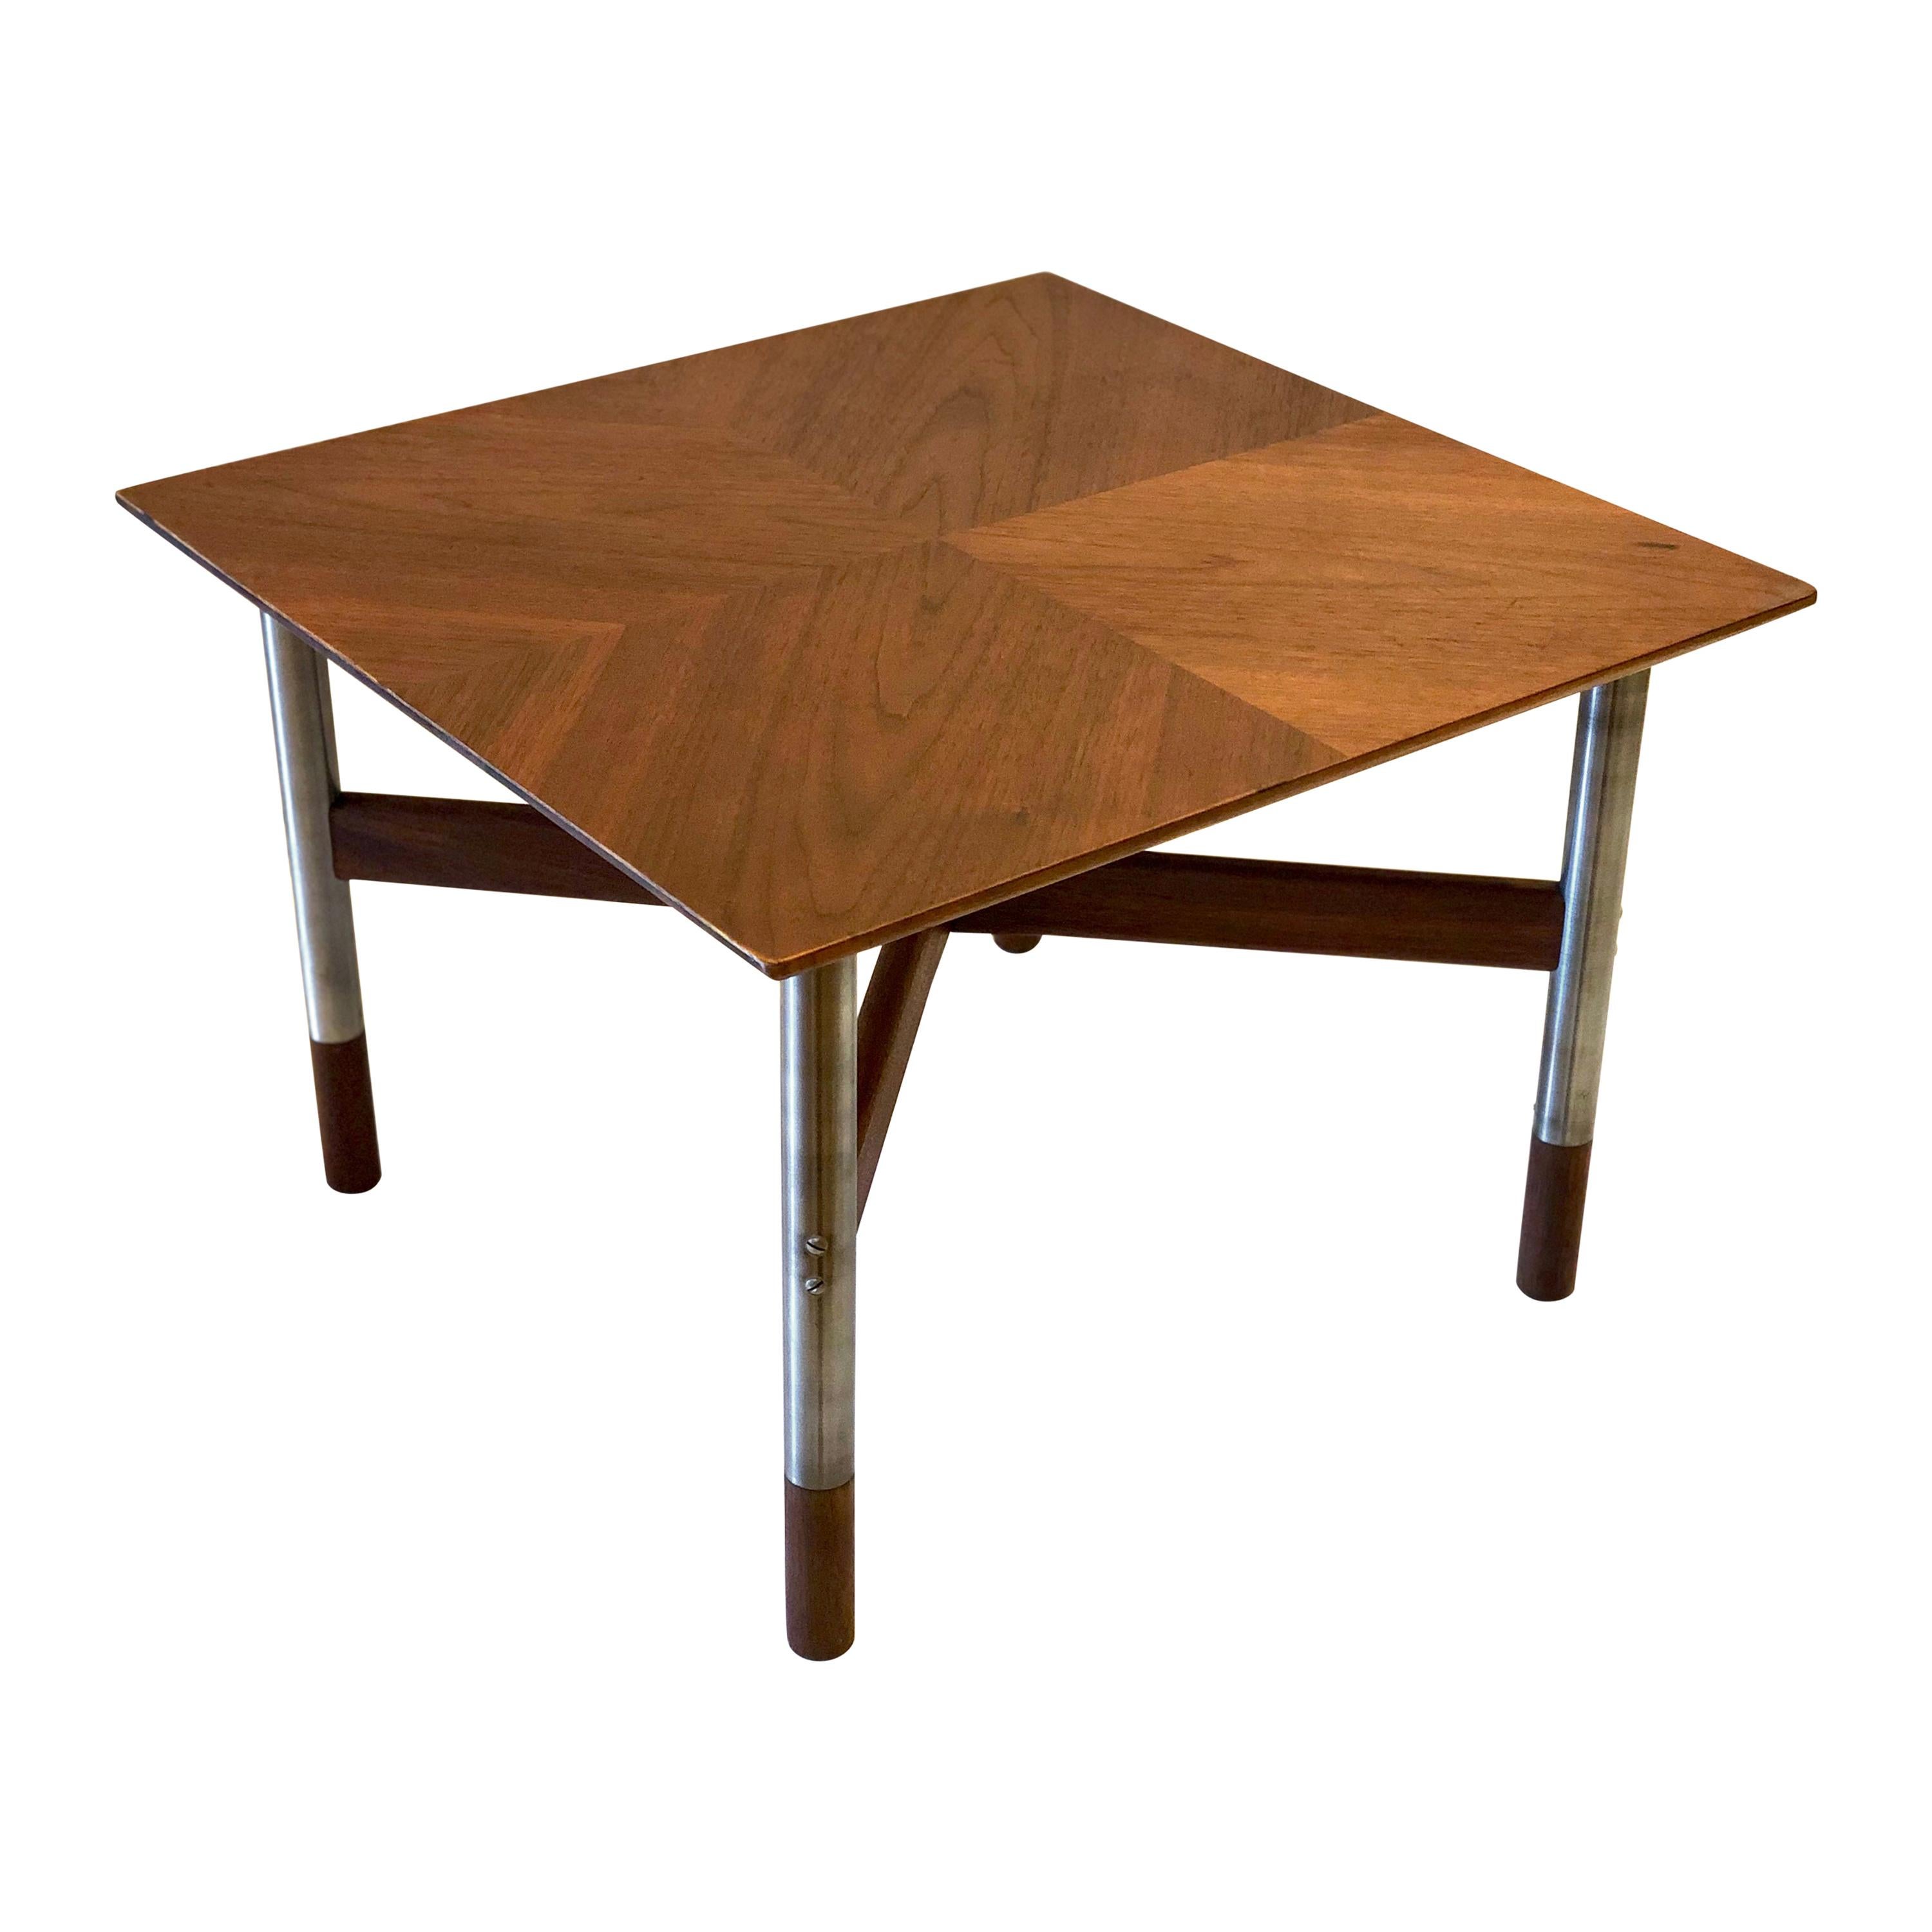 Petite & Rare Teak Cocktail Square Table with Stainless Steel Legs and Wood Tips